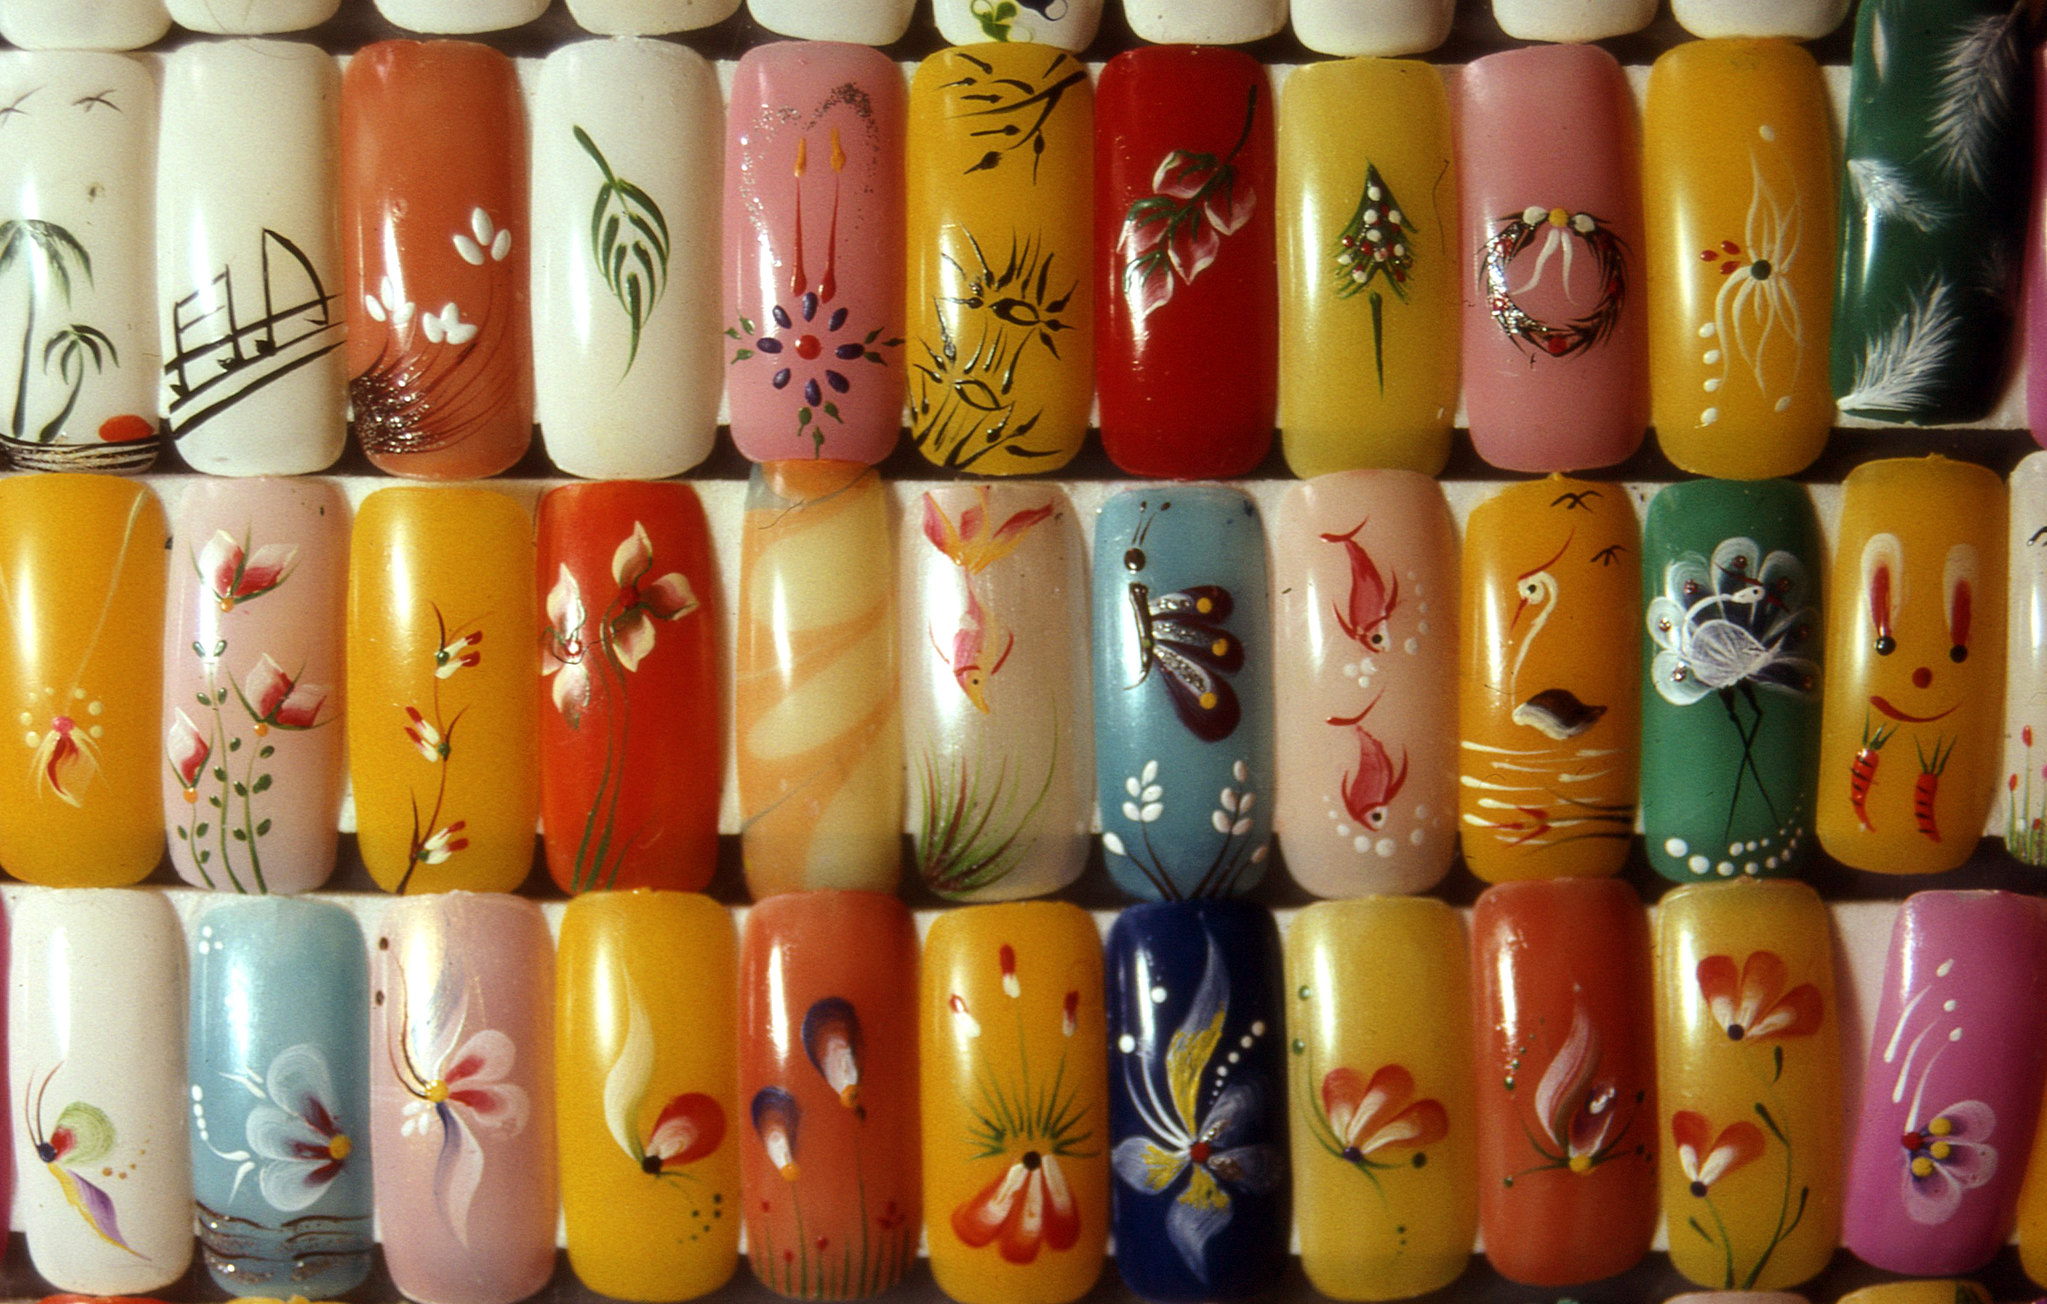 Artificial nails by Mike Fernwood on Flickr